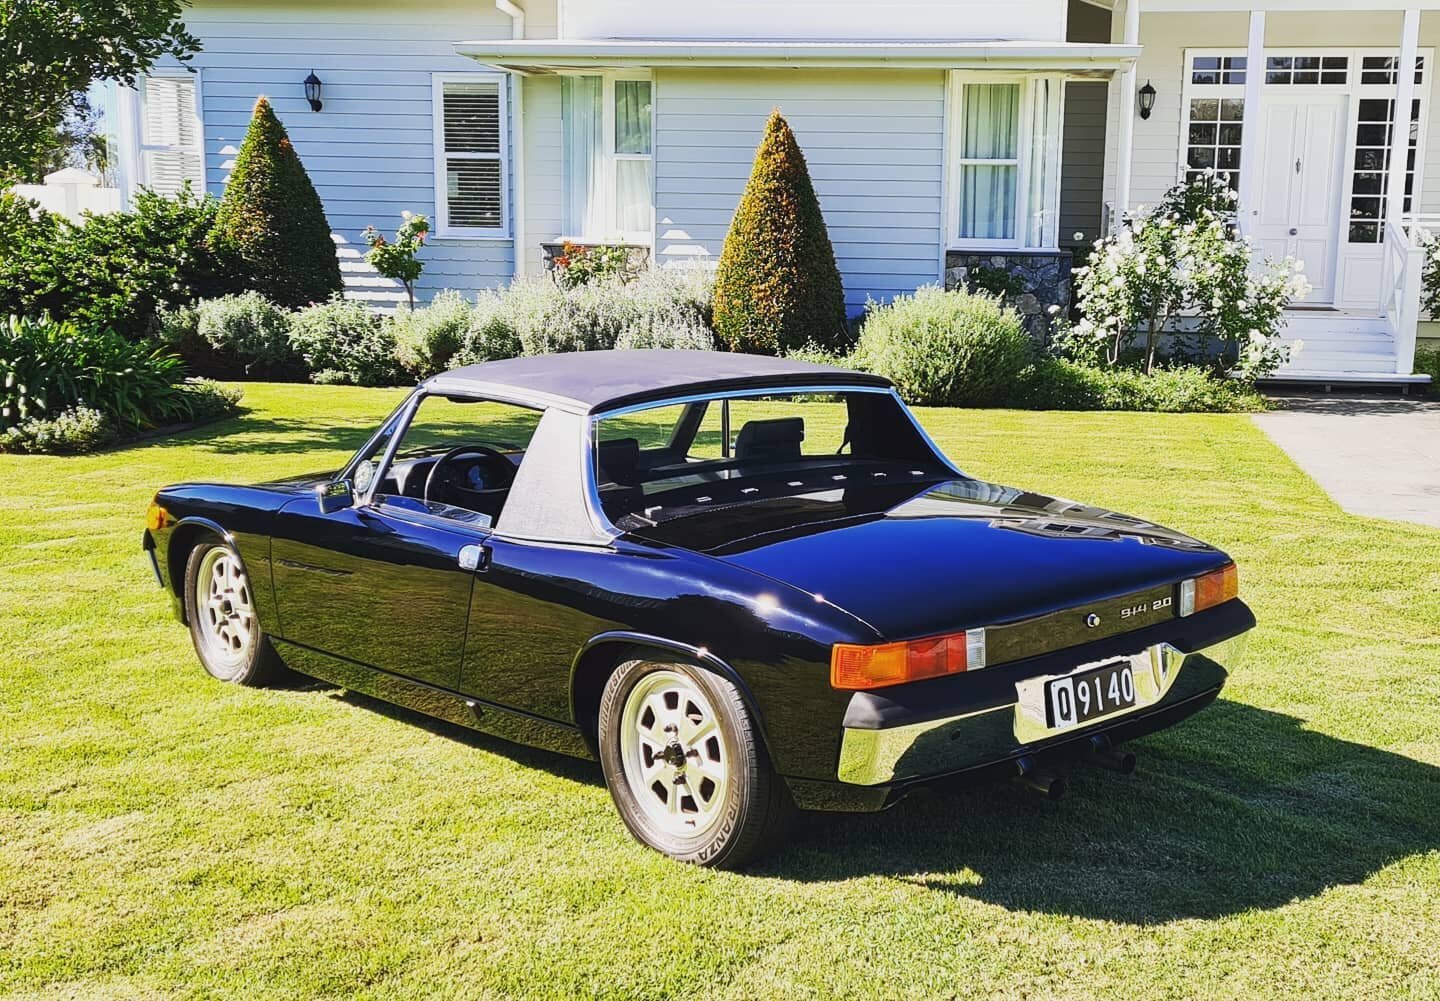 Coming soon:
The last #affordable classic Porsche; the 914. 
Factory black on black, with matching numbers and original logbook 👌🏁

#iusethetermaffordableloosely #drivetastefully #avantgarde #914 #porschefamily #classicporsche #bowdensown #ecuriebo